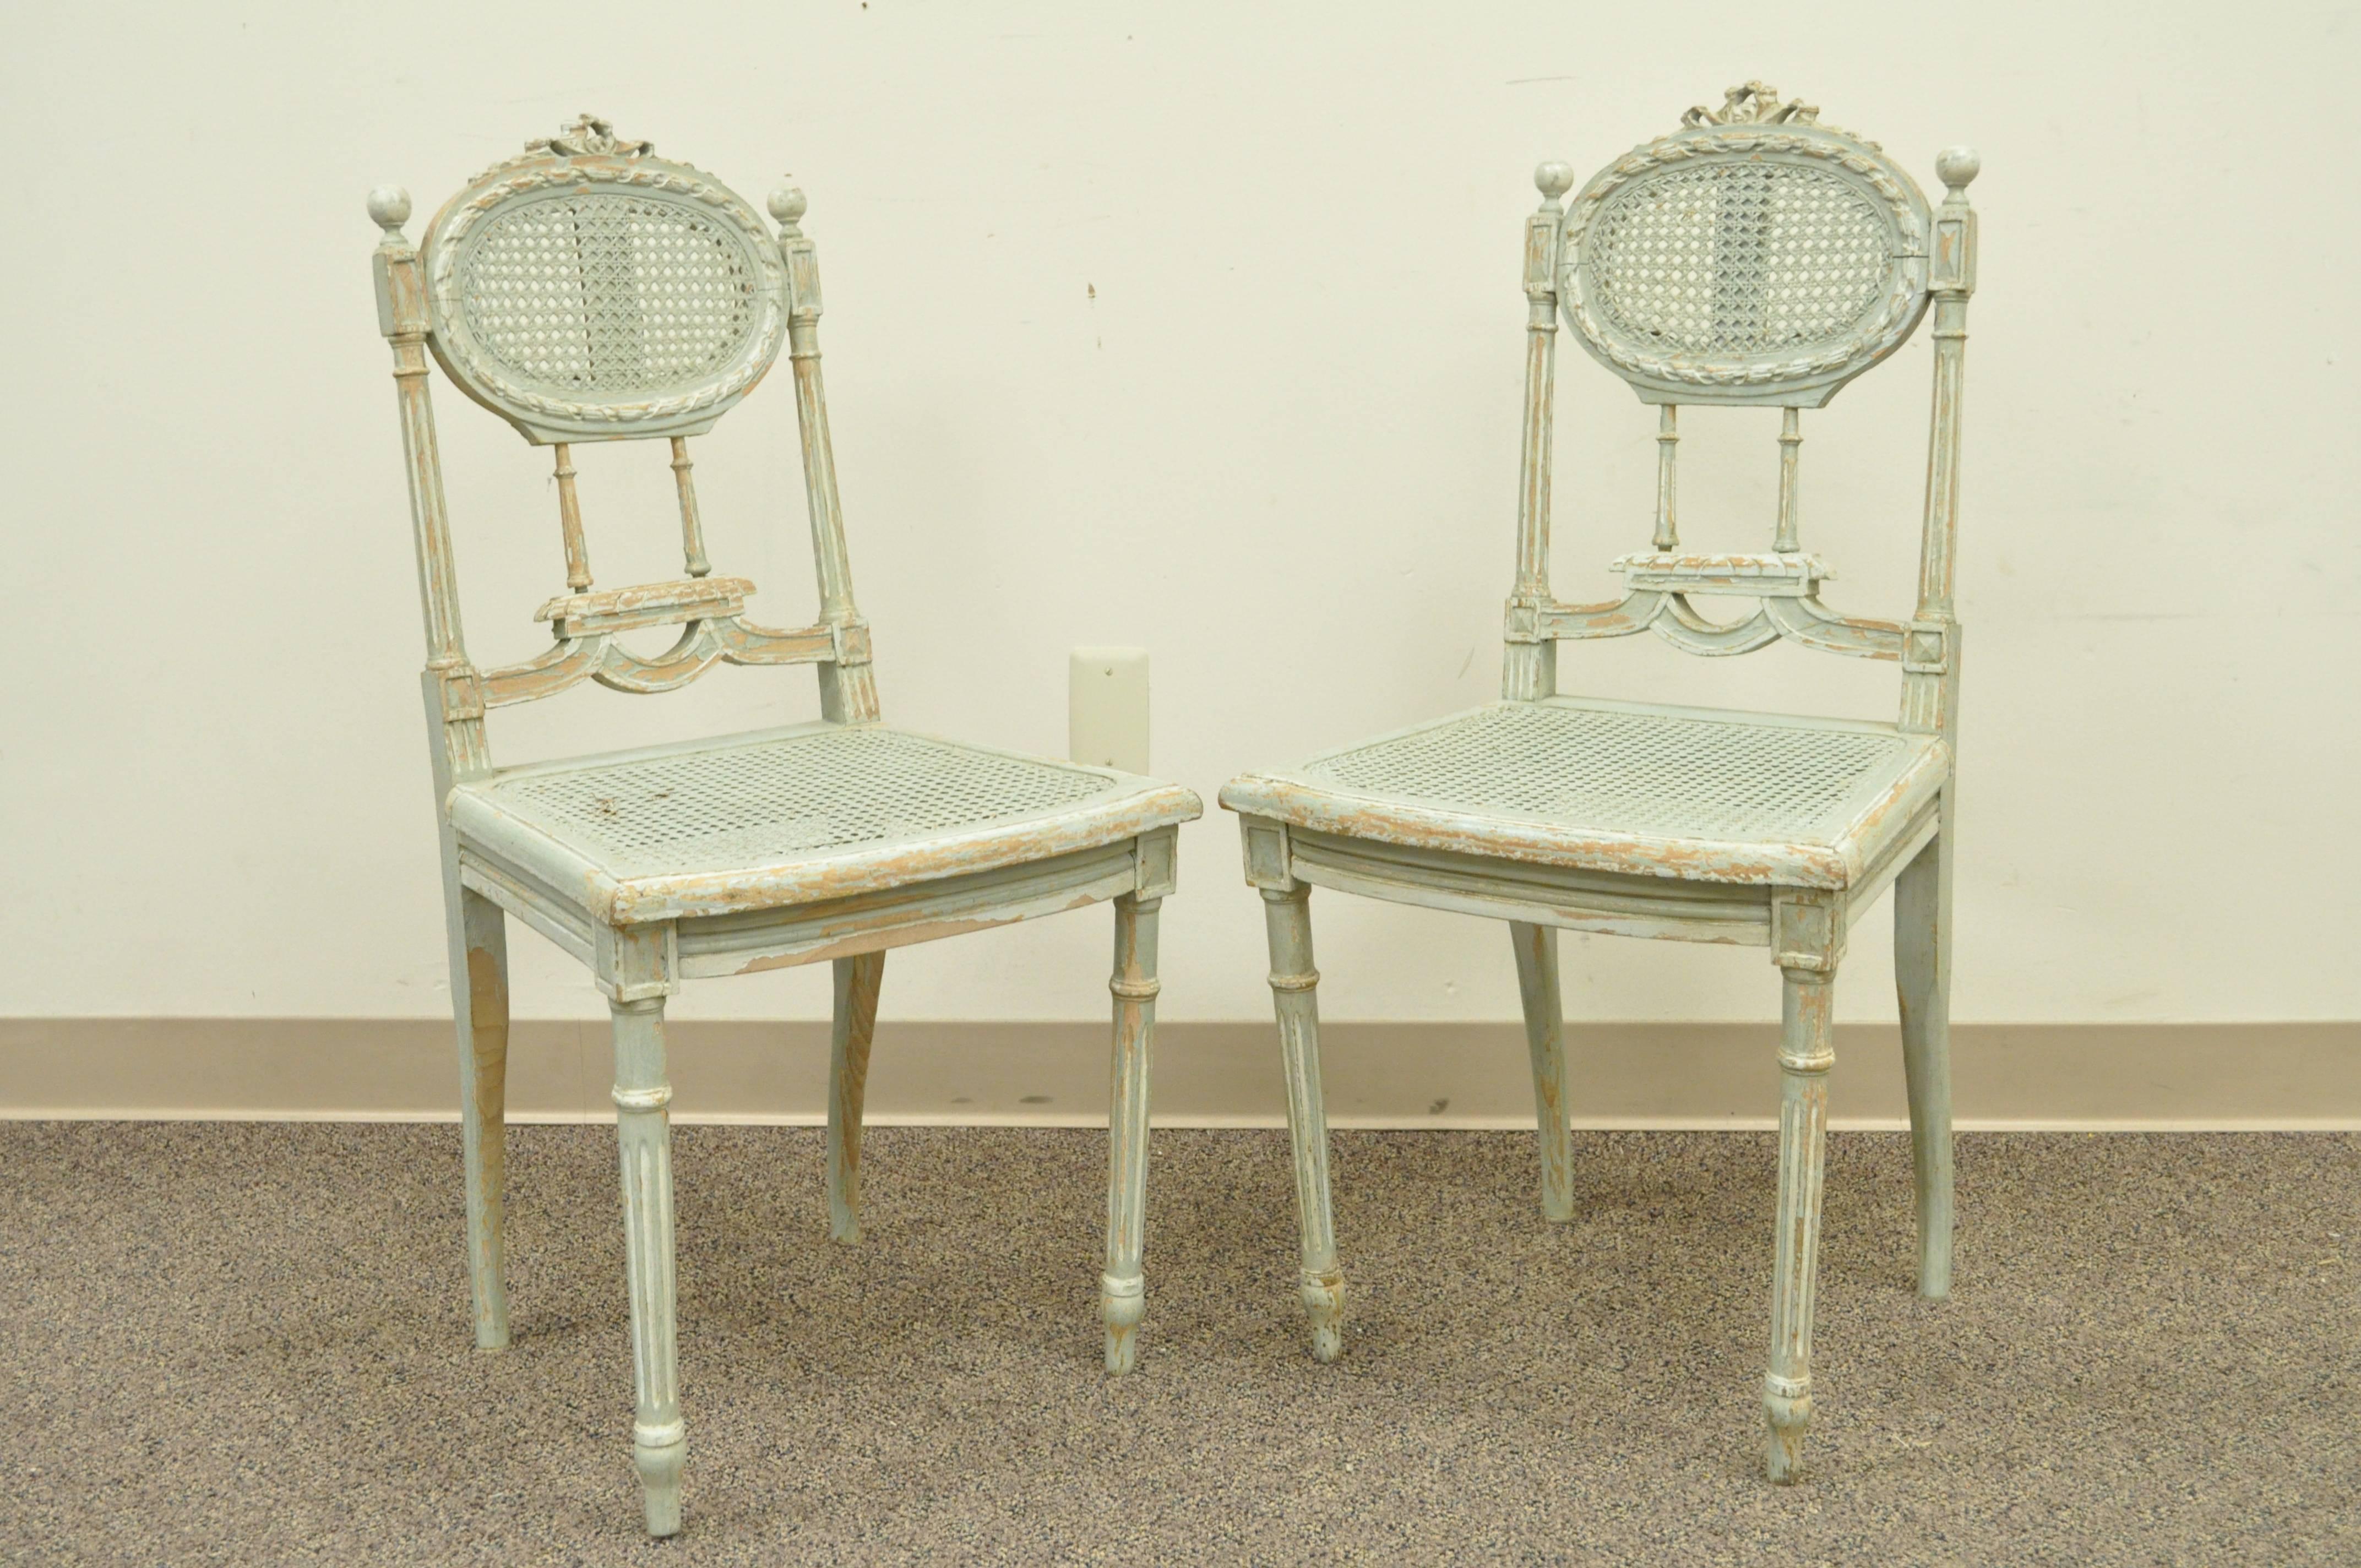 Early 20th Century 5 Piece French Louis XVI Style Distress Painted Parlor or Salon Suite